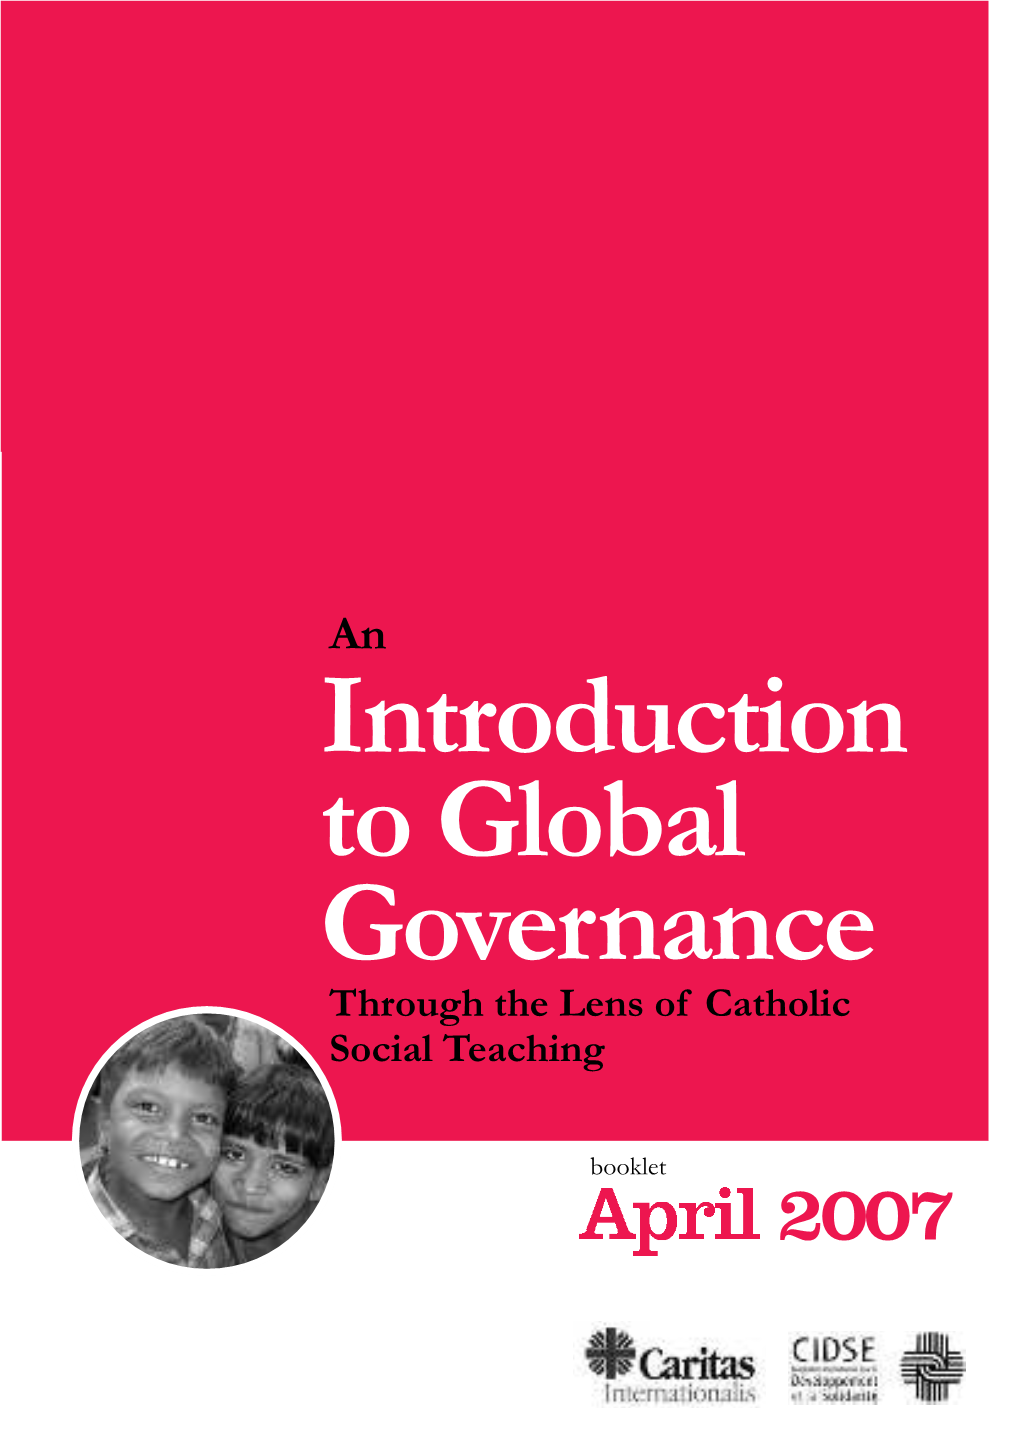 EN-An Introduction to Global Governance Through The